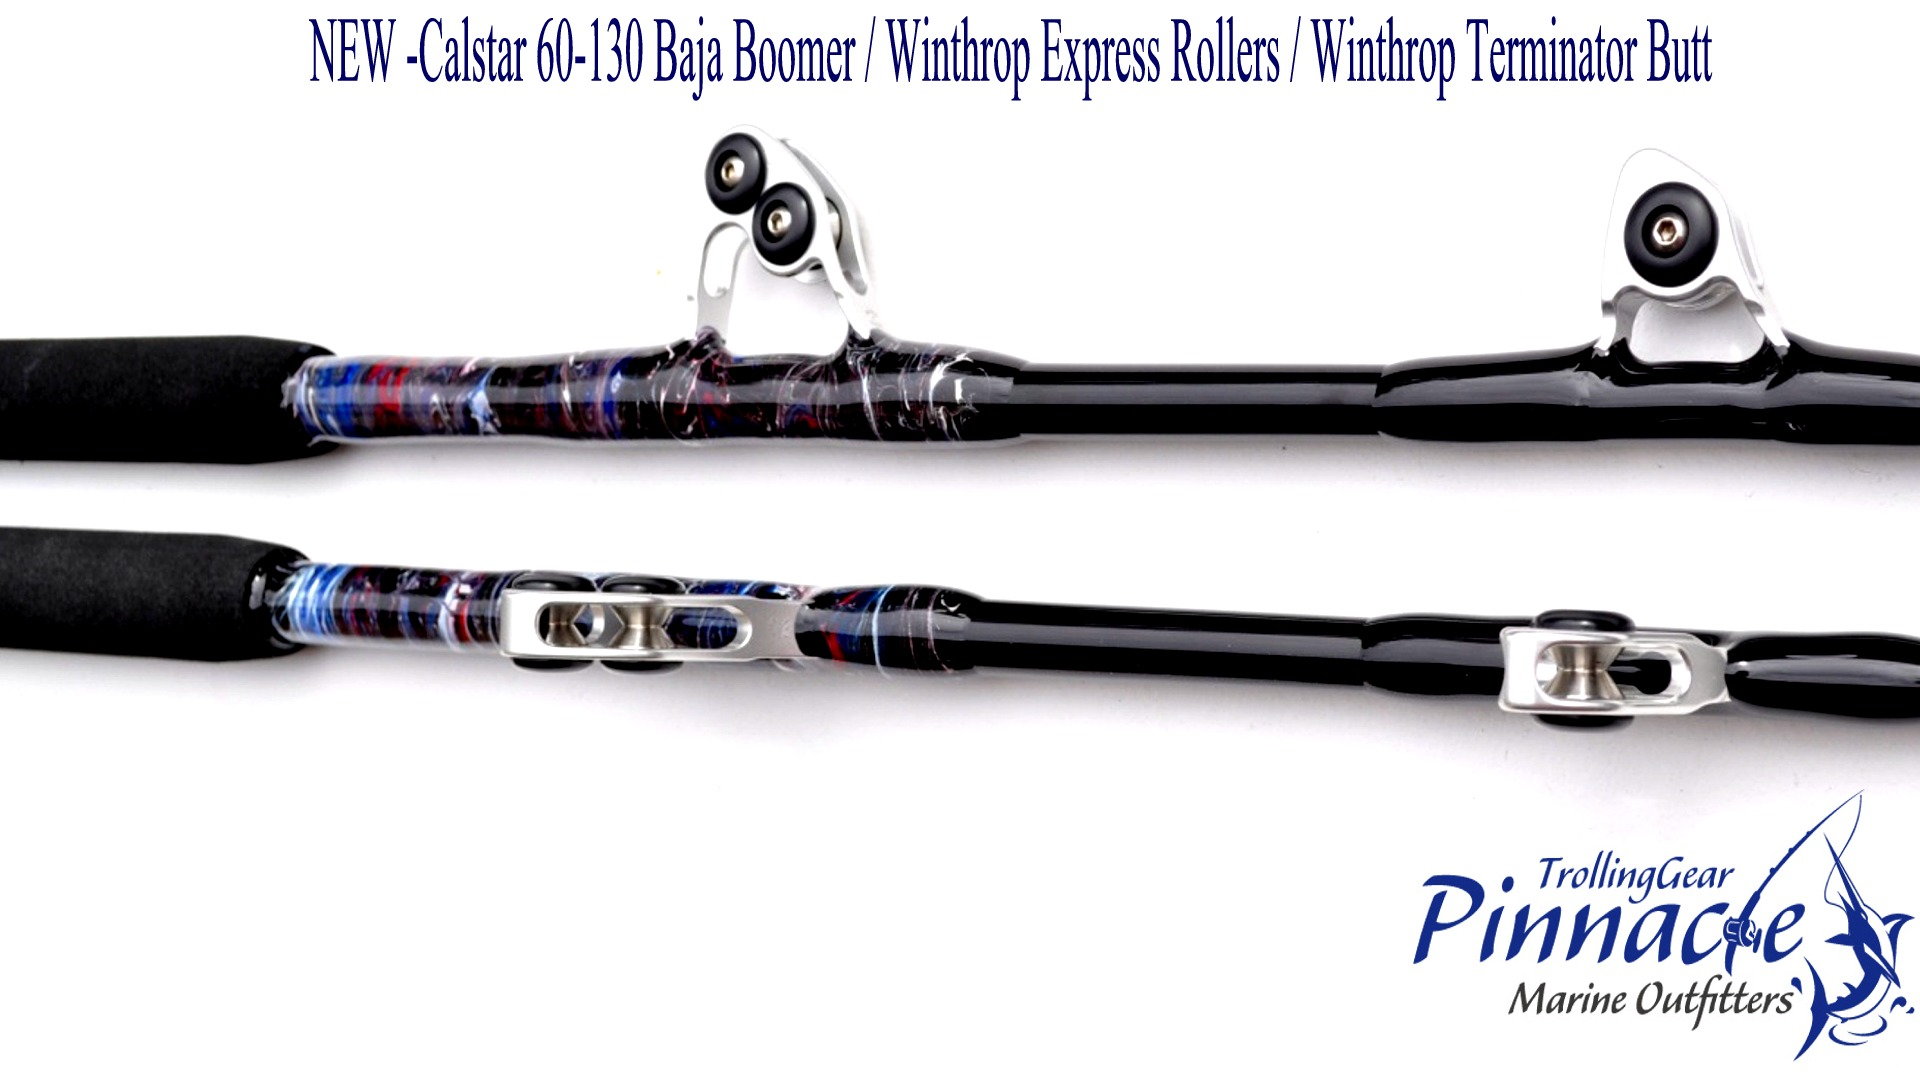 Custom Winthrop/Calstar Rods Targets - BlueFin / Swords - Pinnacle Marine -  The Hull Truth - Boating and Fishing Forum